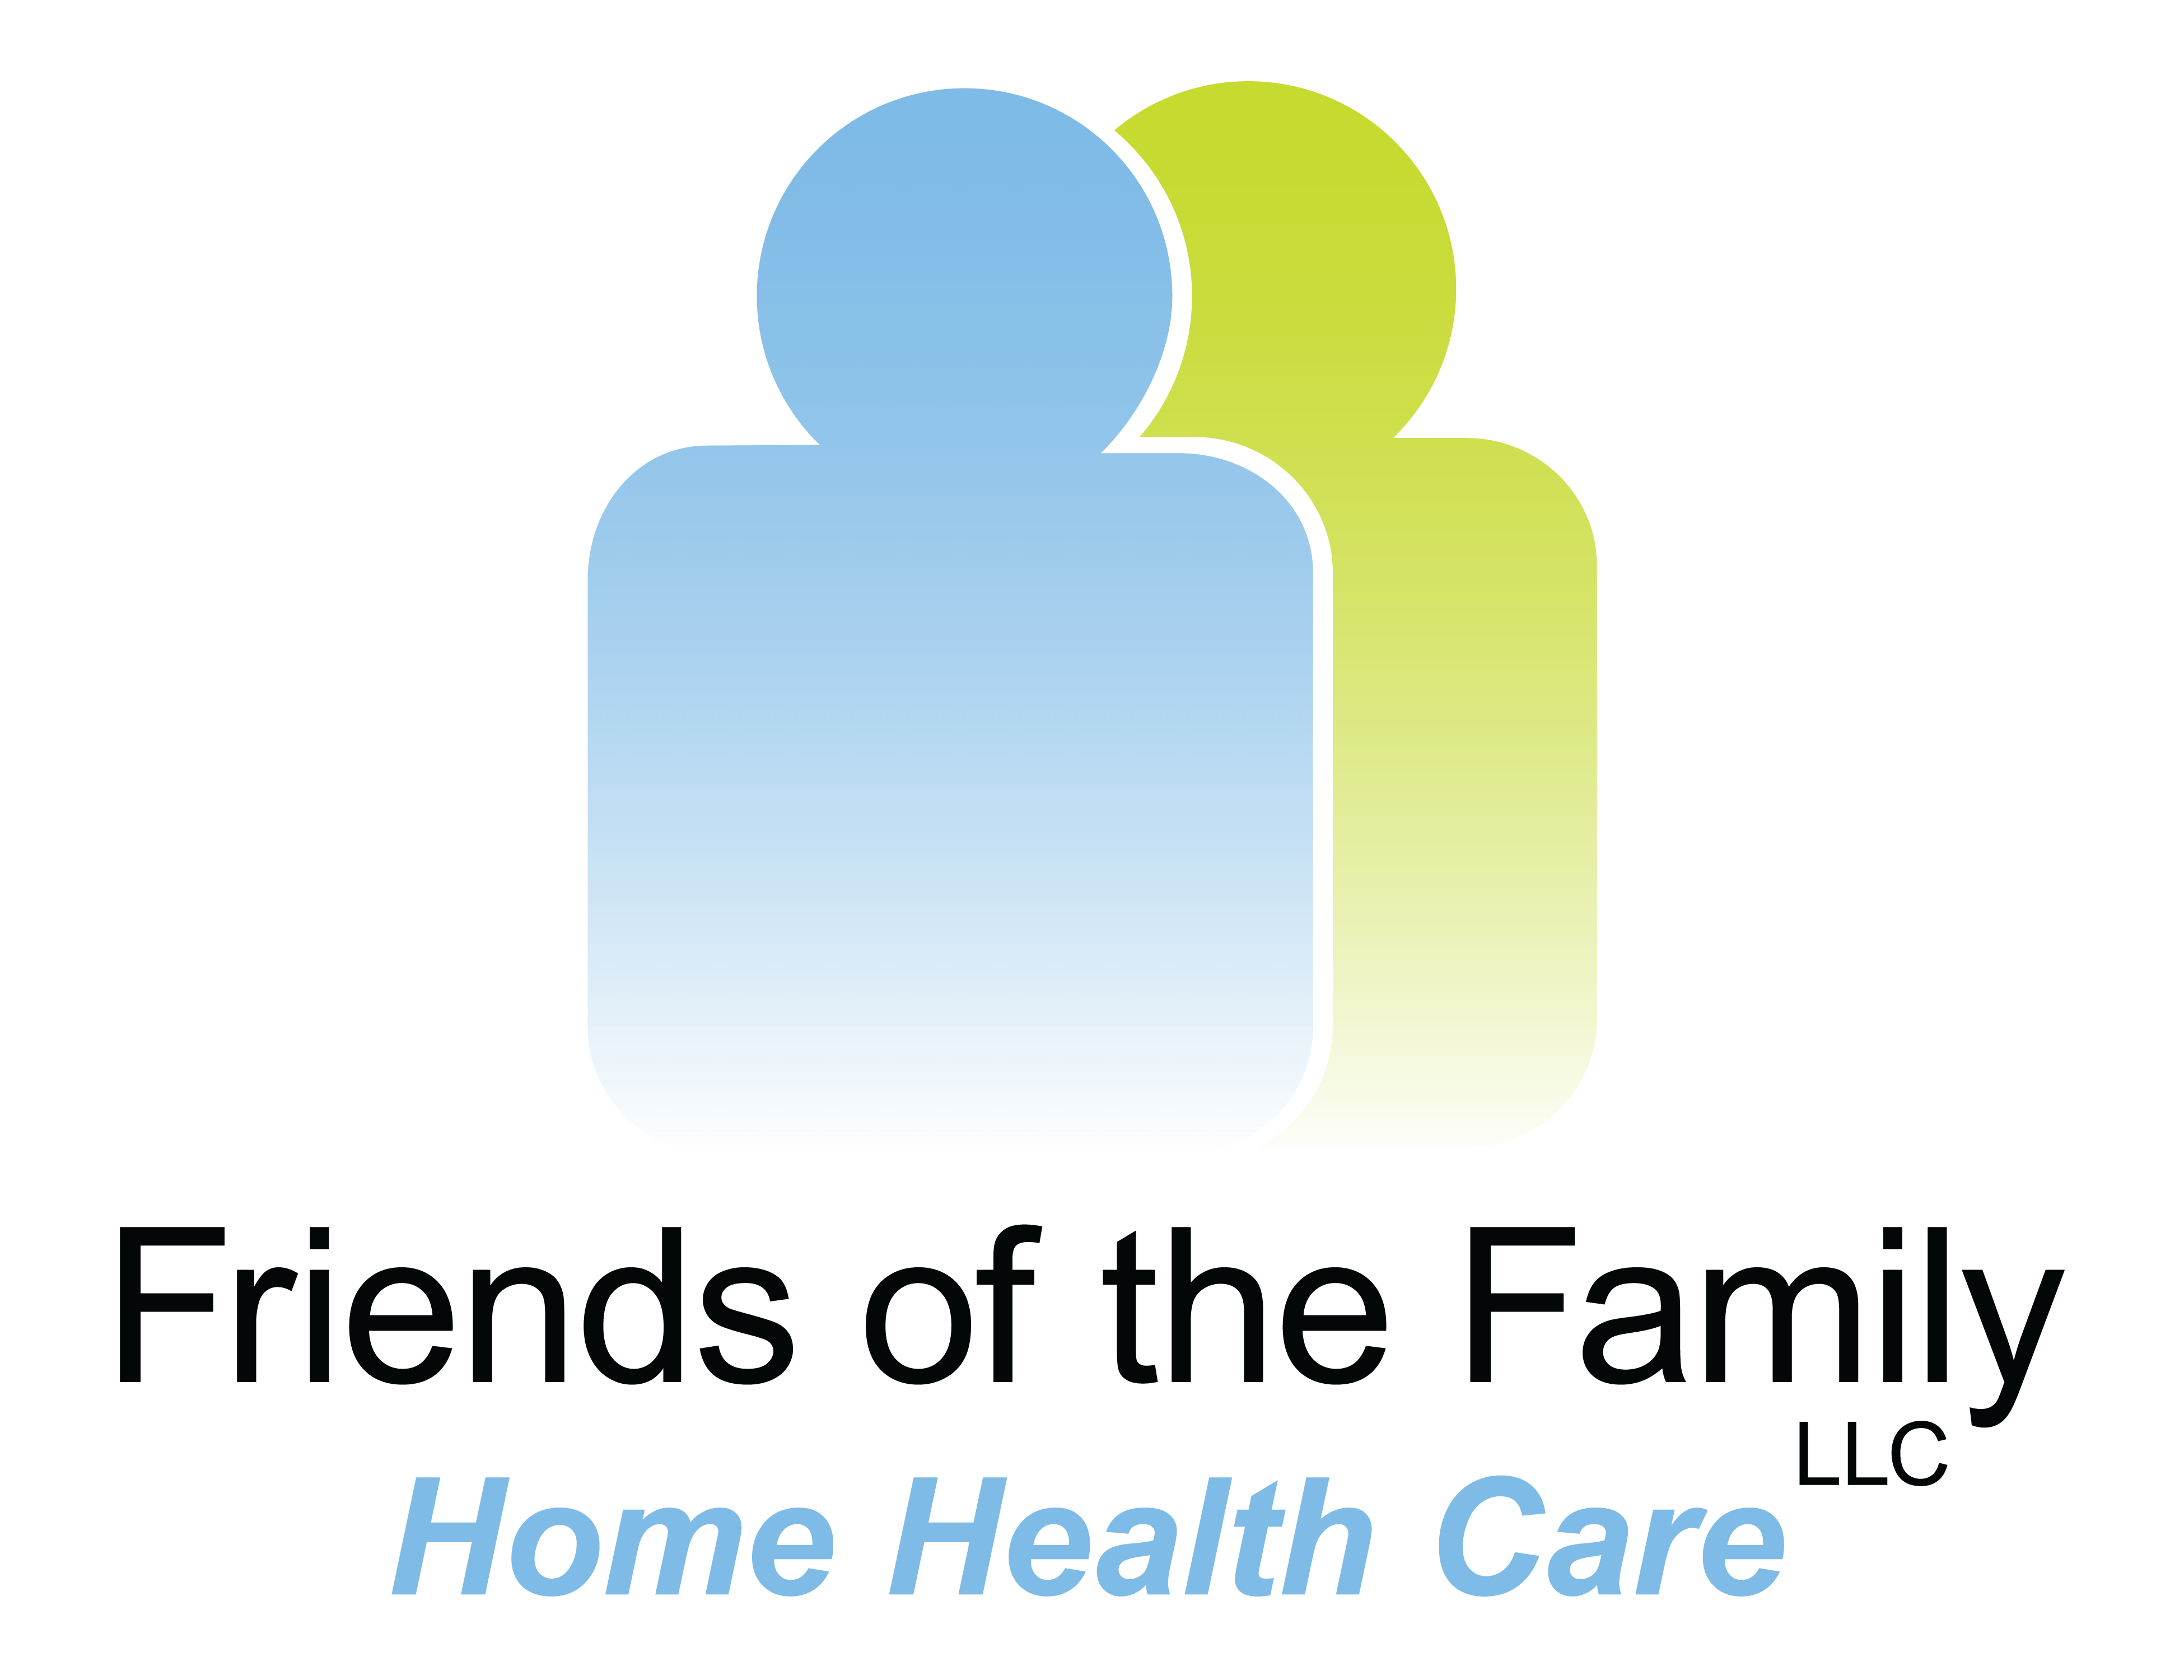 Friends of the Family Home Health Care Outlines Its Services in Temperance